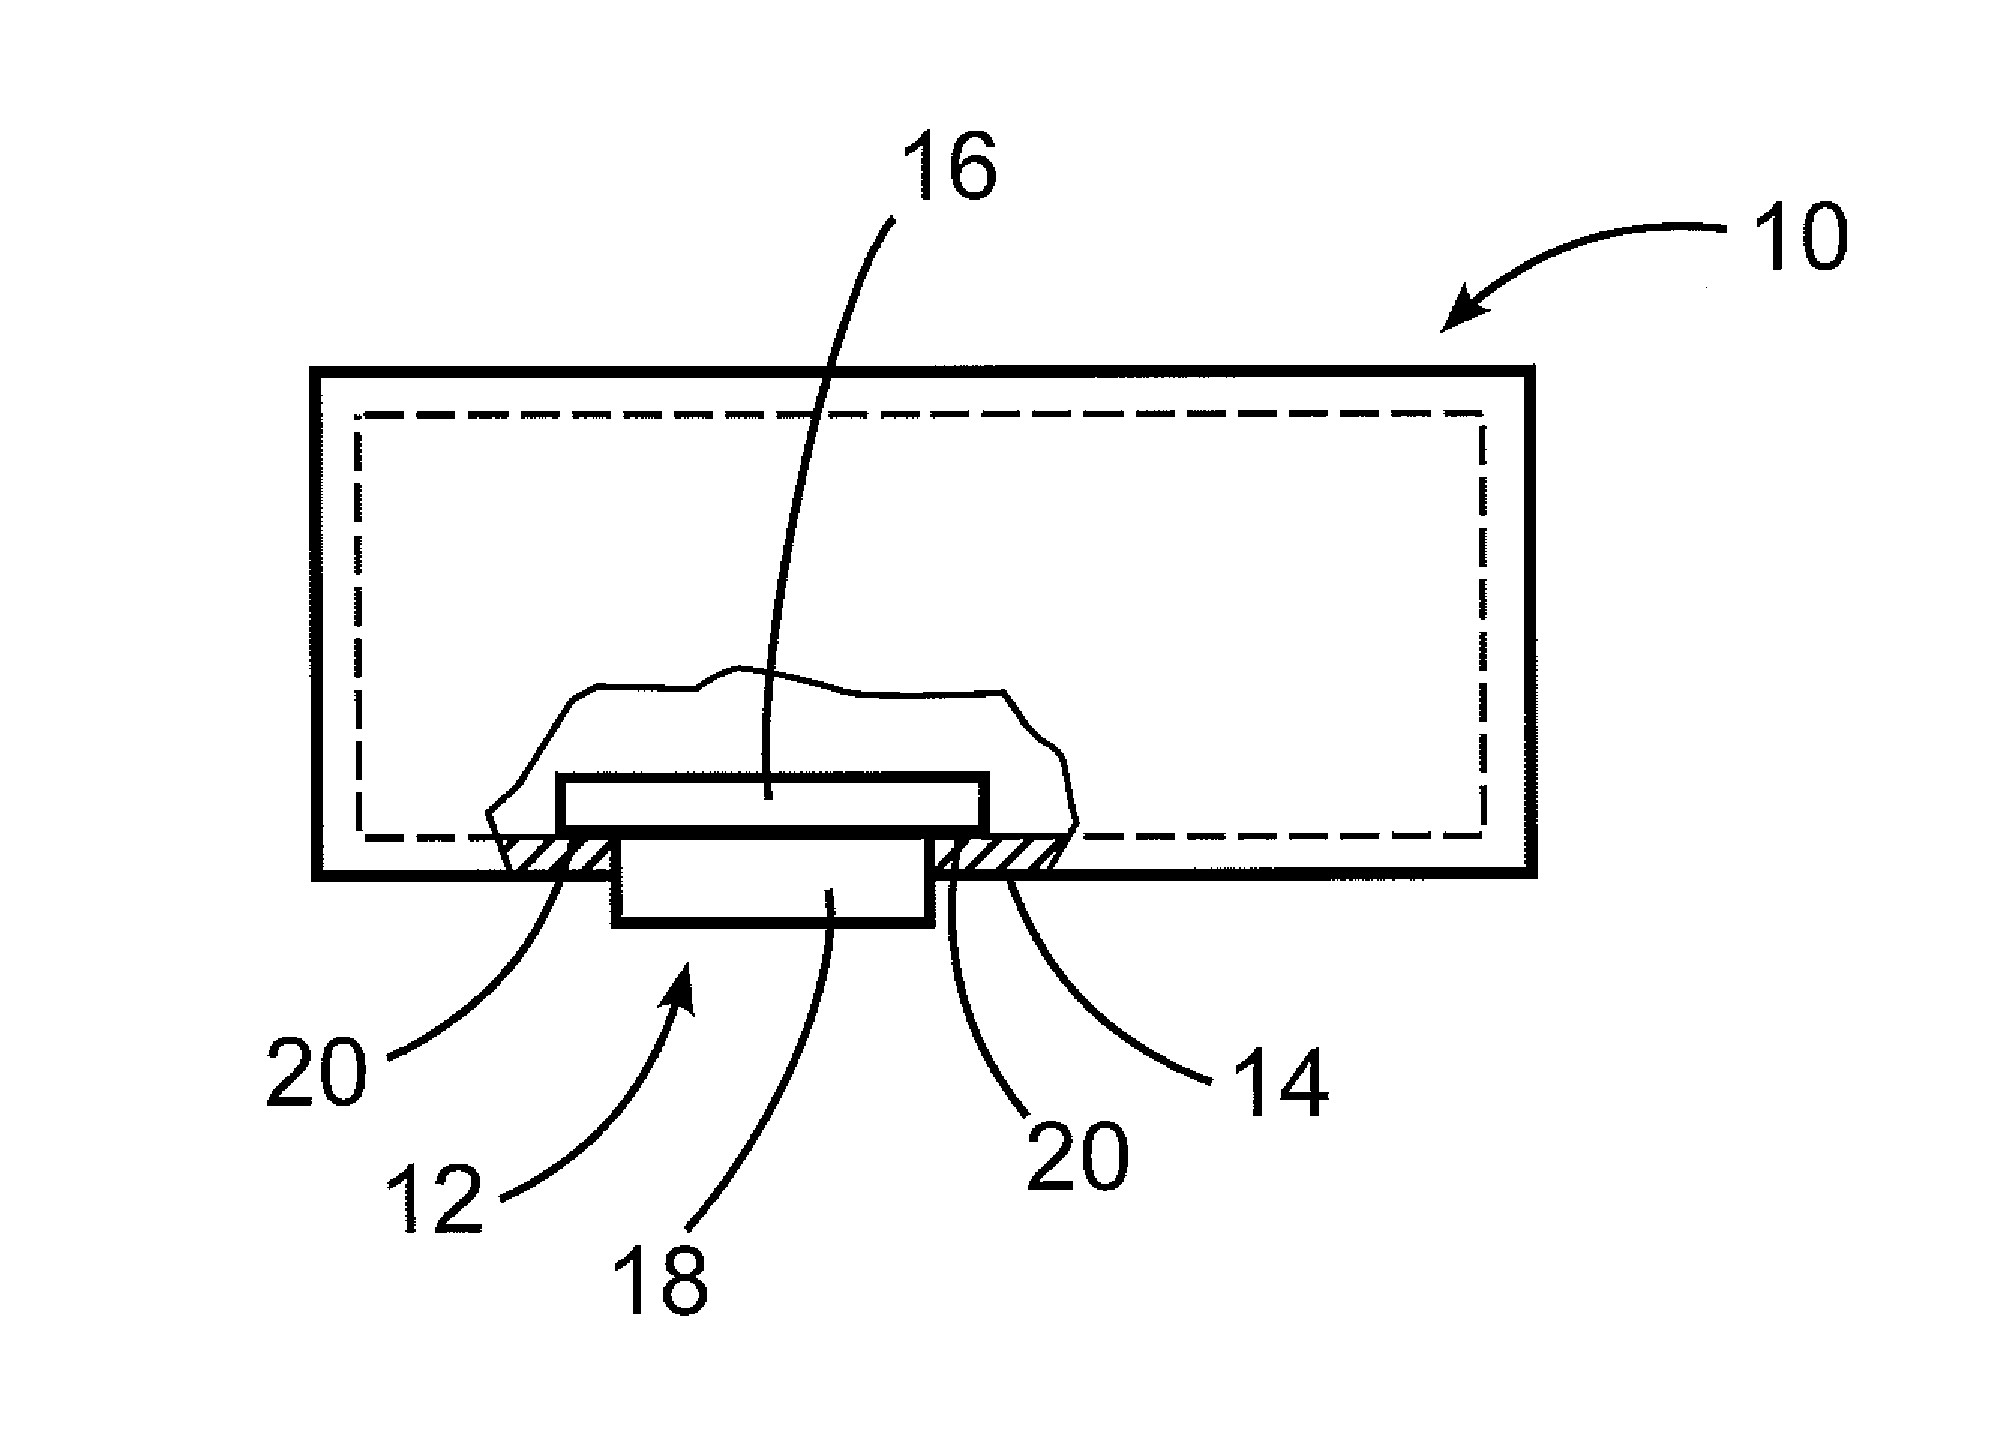 Pressure release device for housings with flameproof encapsulation with porous body having interference fit